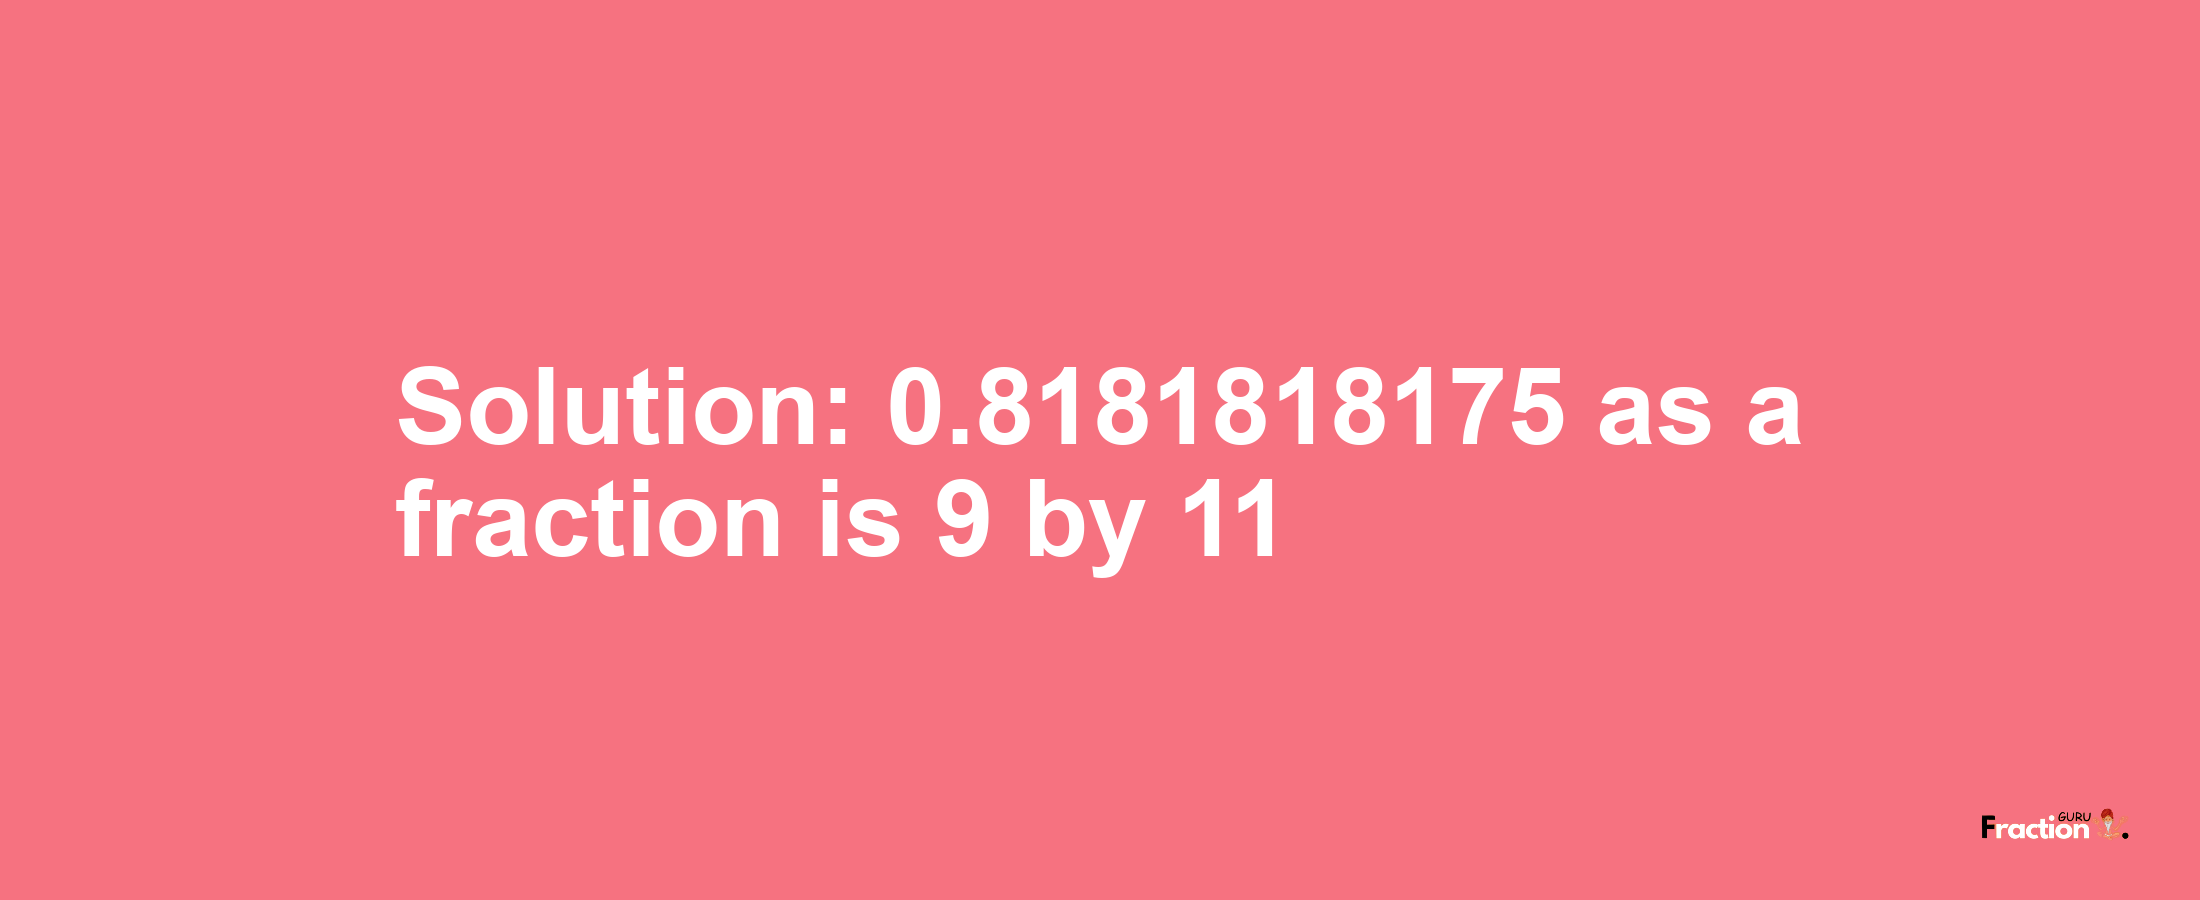 Solution:0.8181818175 as a fraction is 9/11